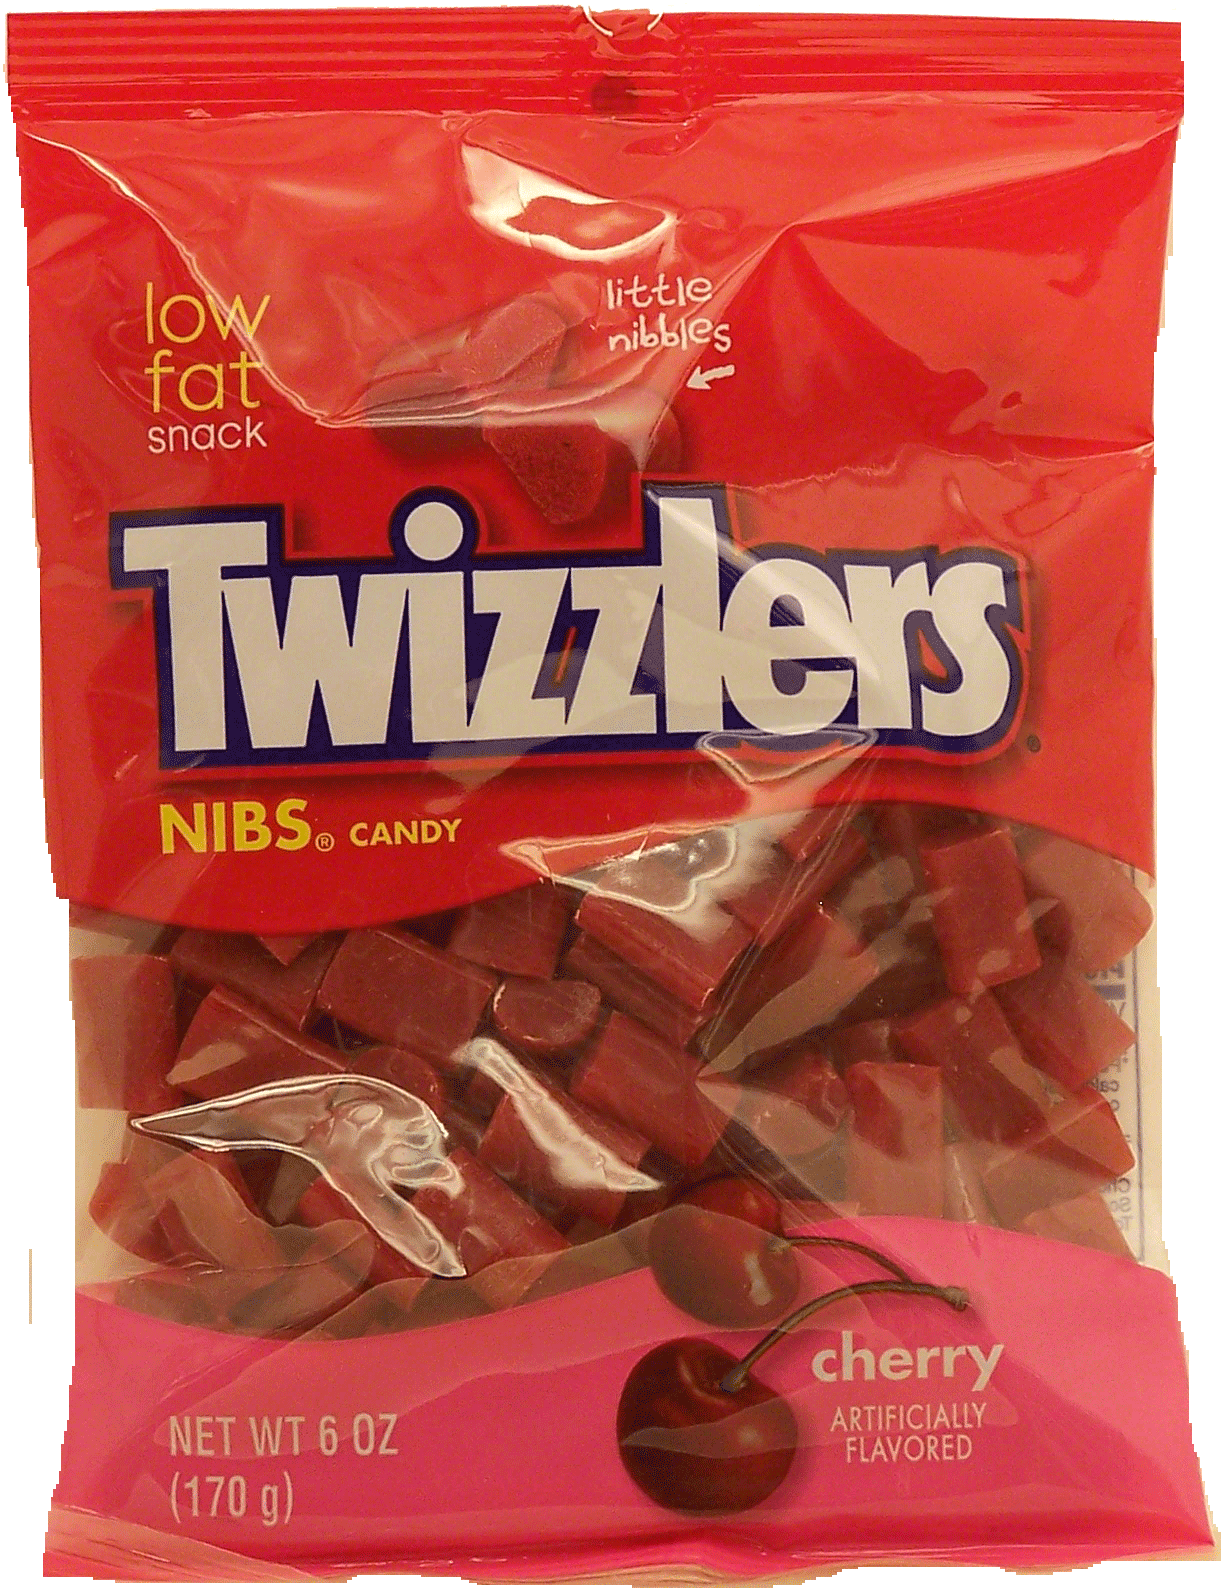 Twizzlers Nibs cherry flavor licorice candy Full-Size Picture